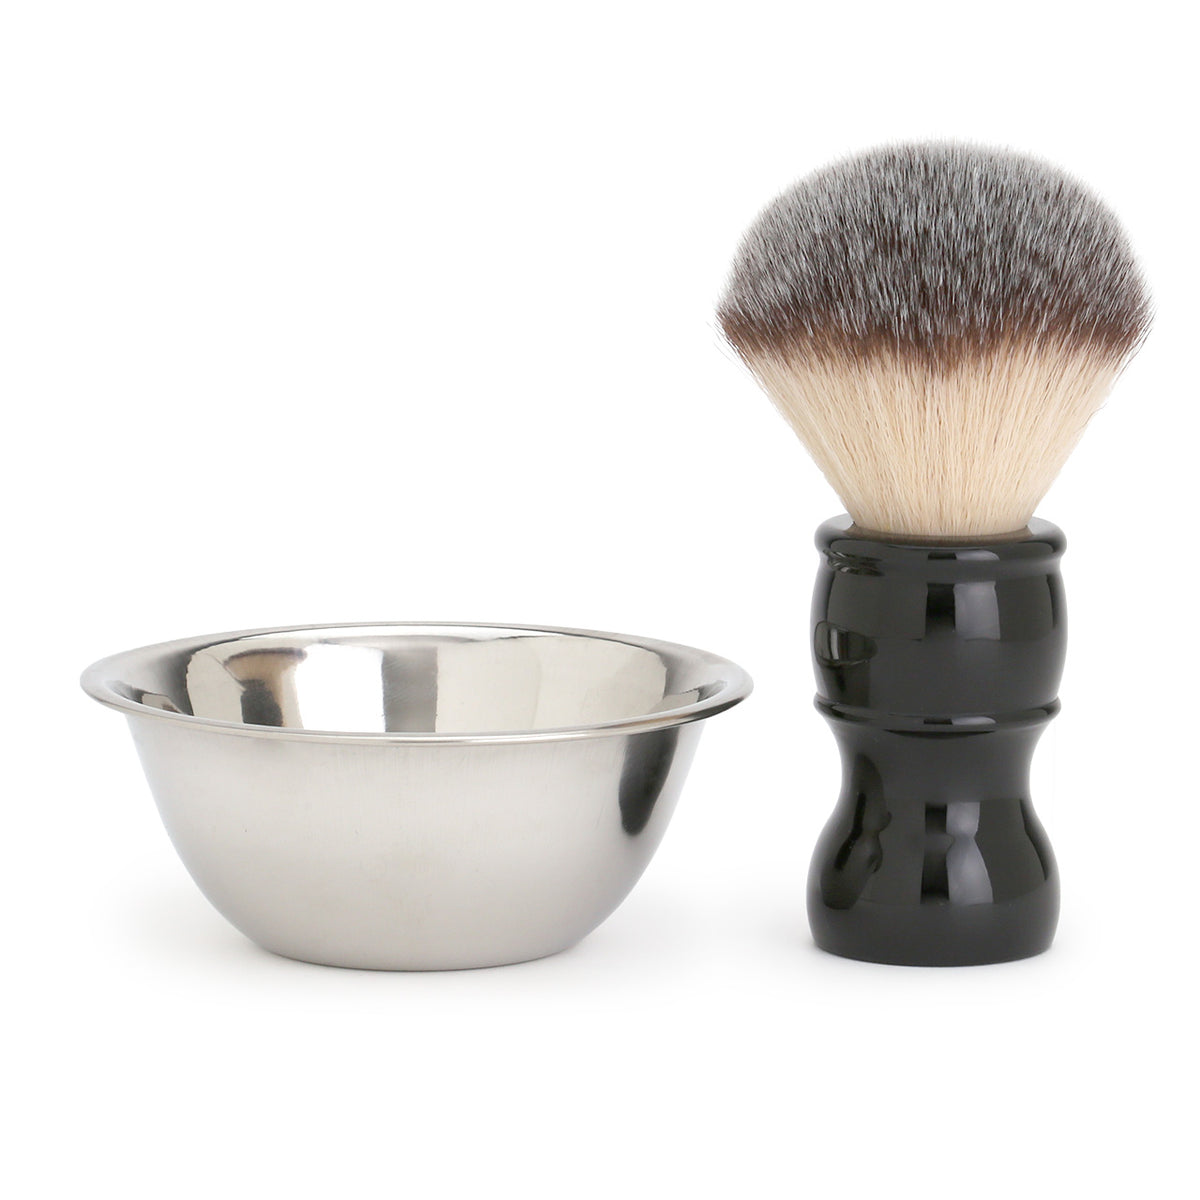 small lather bowl with shaving brush for size reference